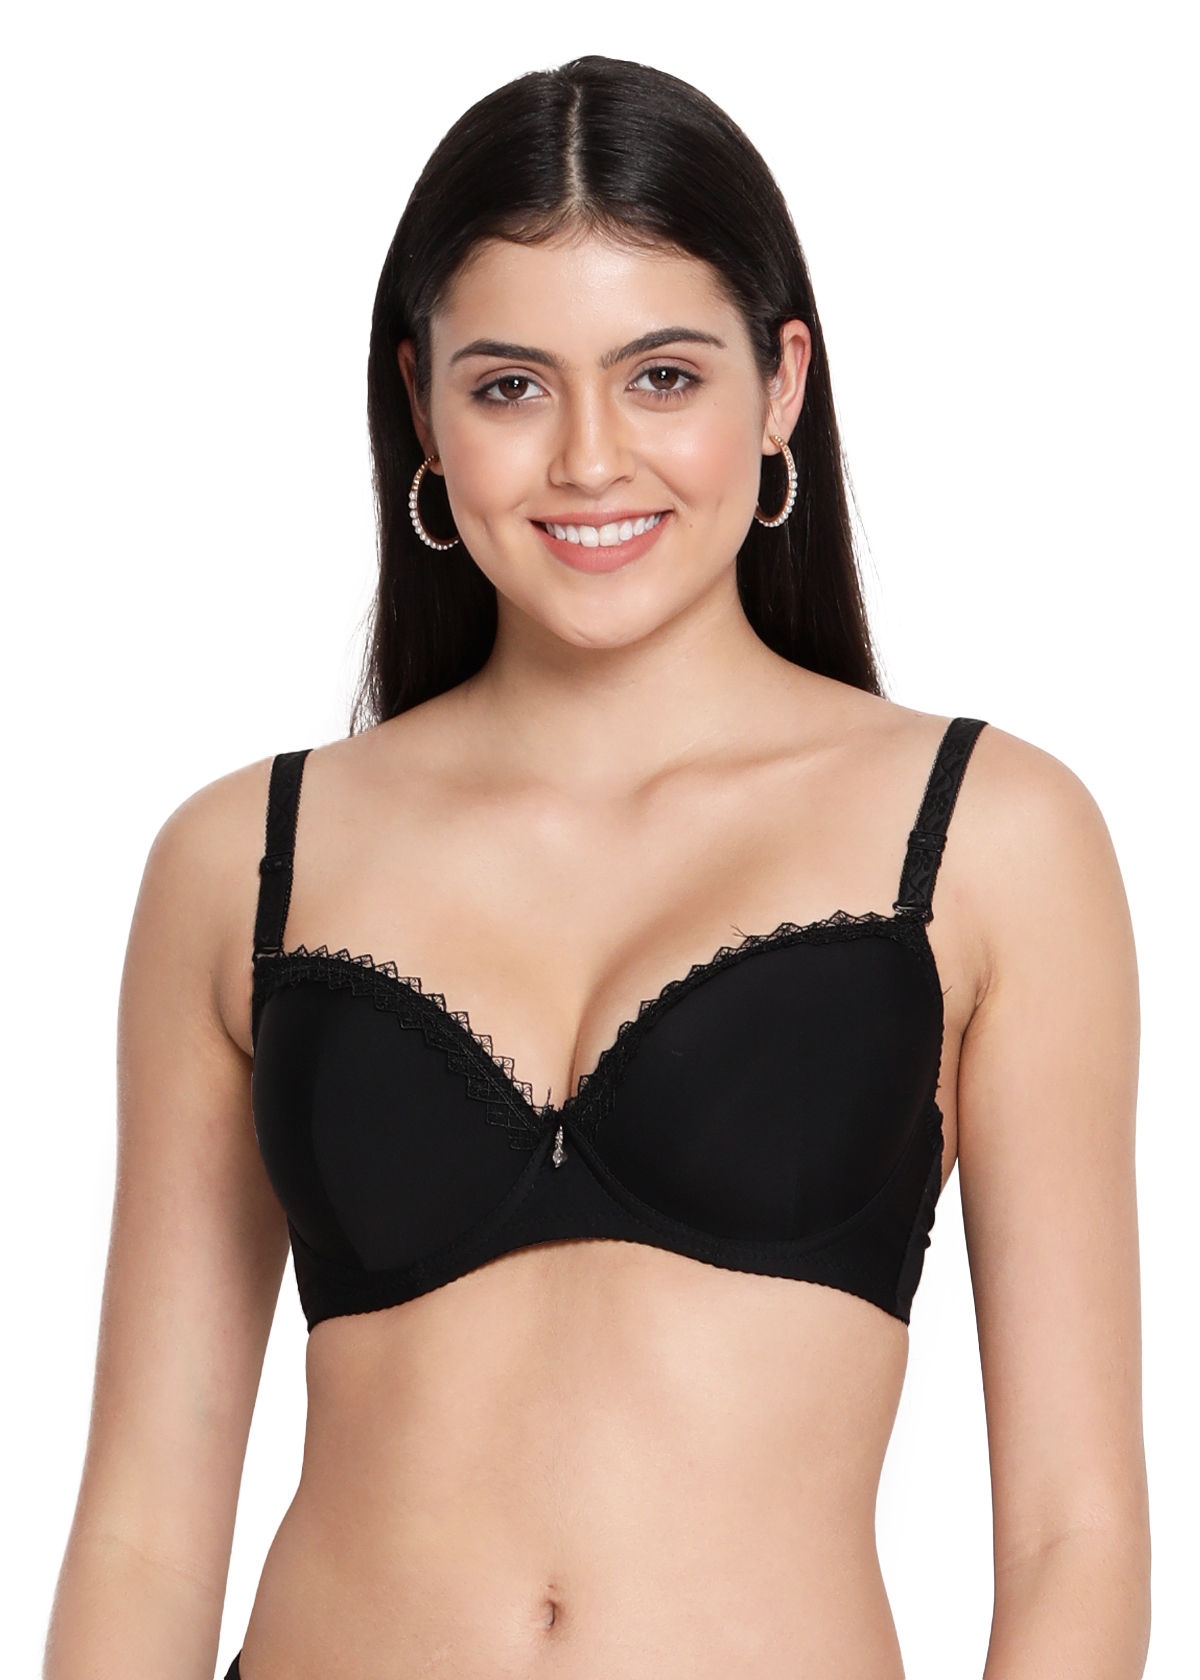 Shyaway.com - This lovely lace push up bra from Susie is an